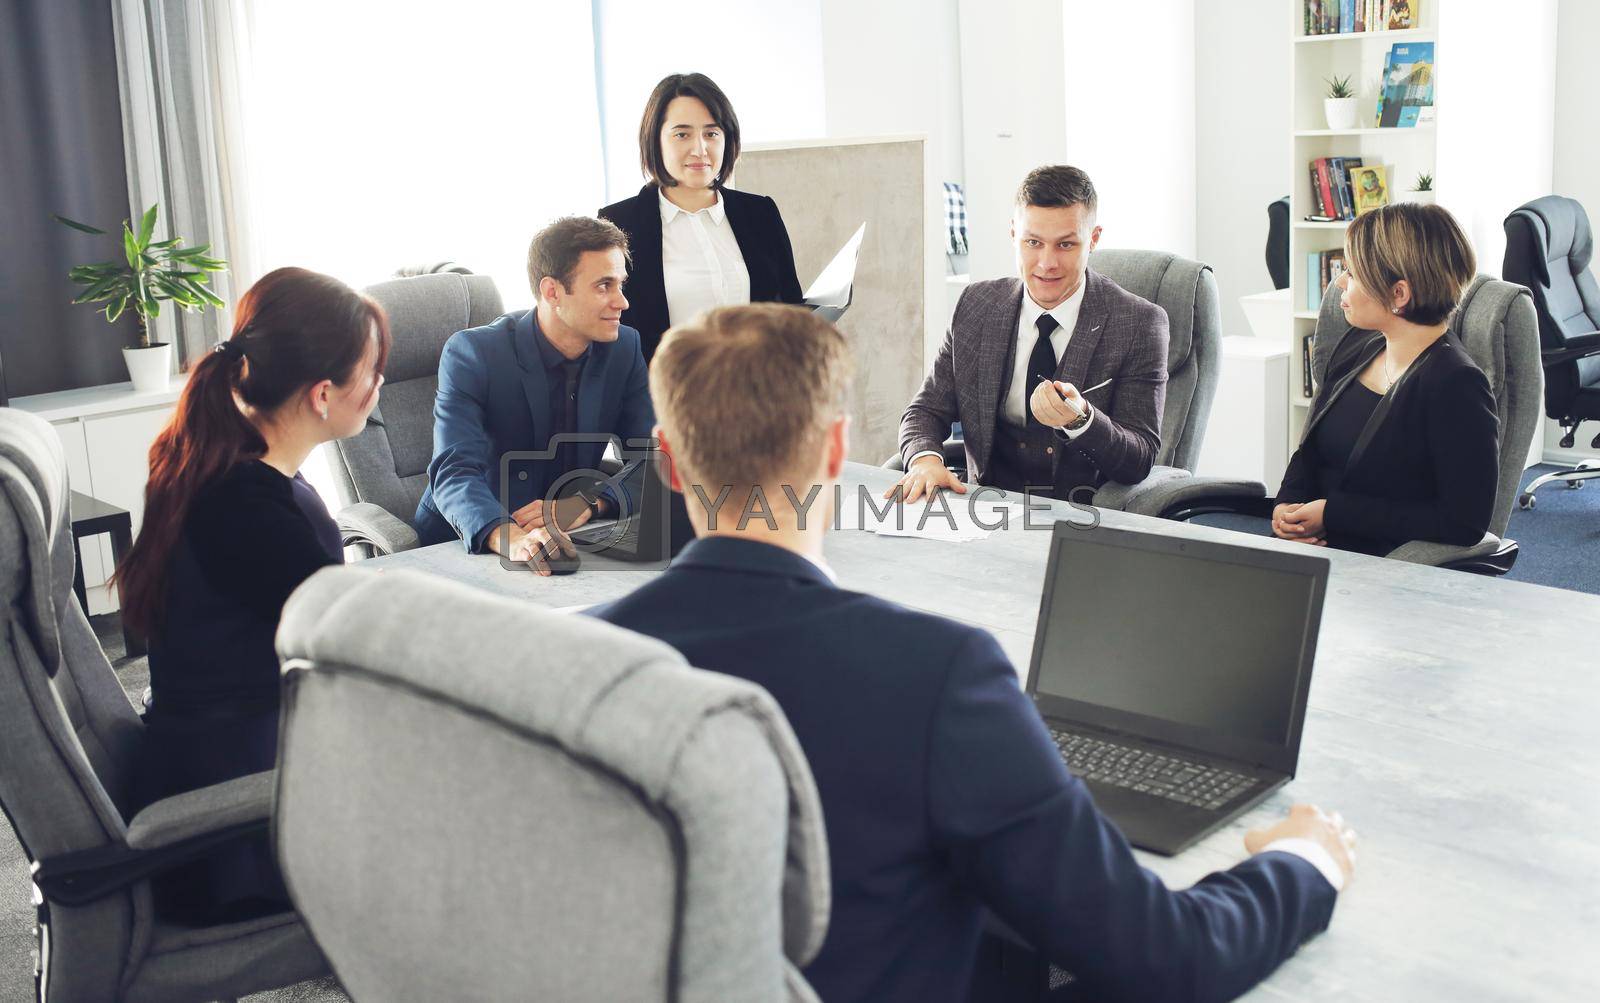 Royalty free image of Group of young successful businessmen lawyers communicating together in a conference room while working on a project by selinsmo